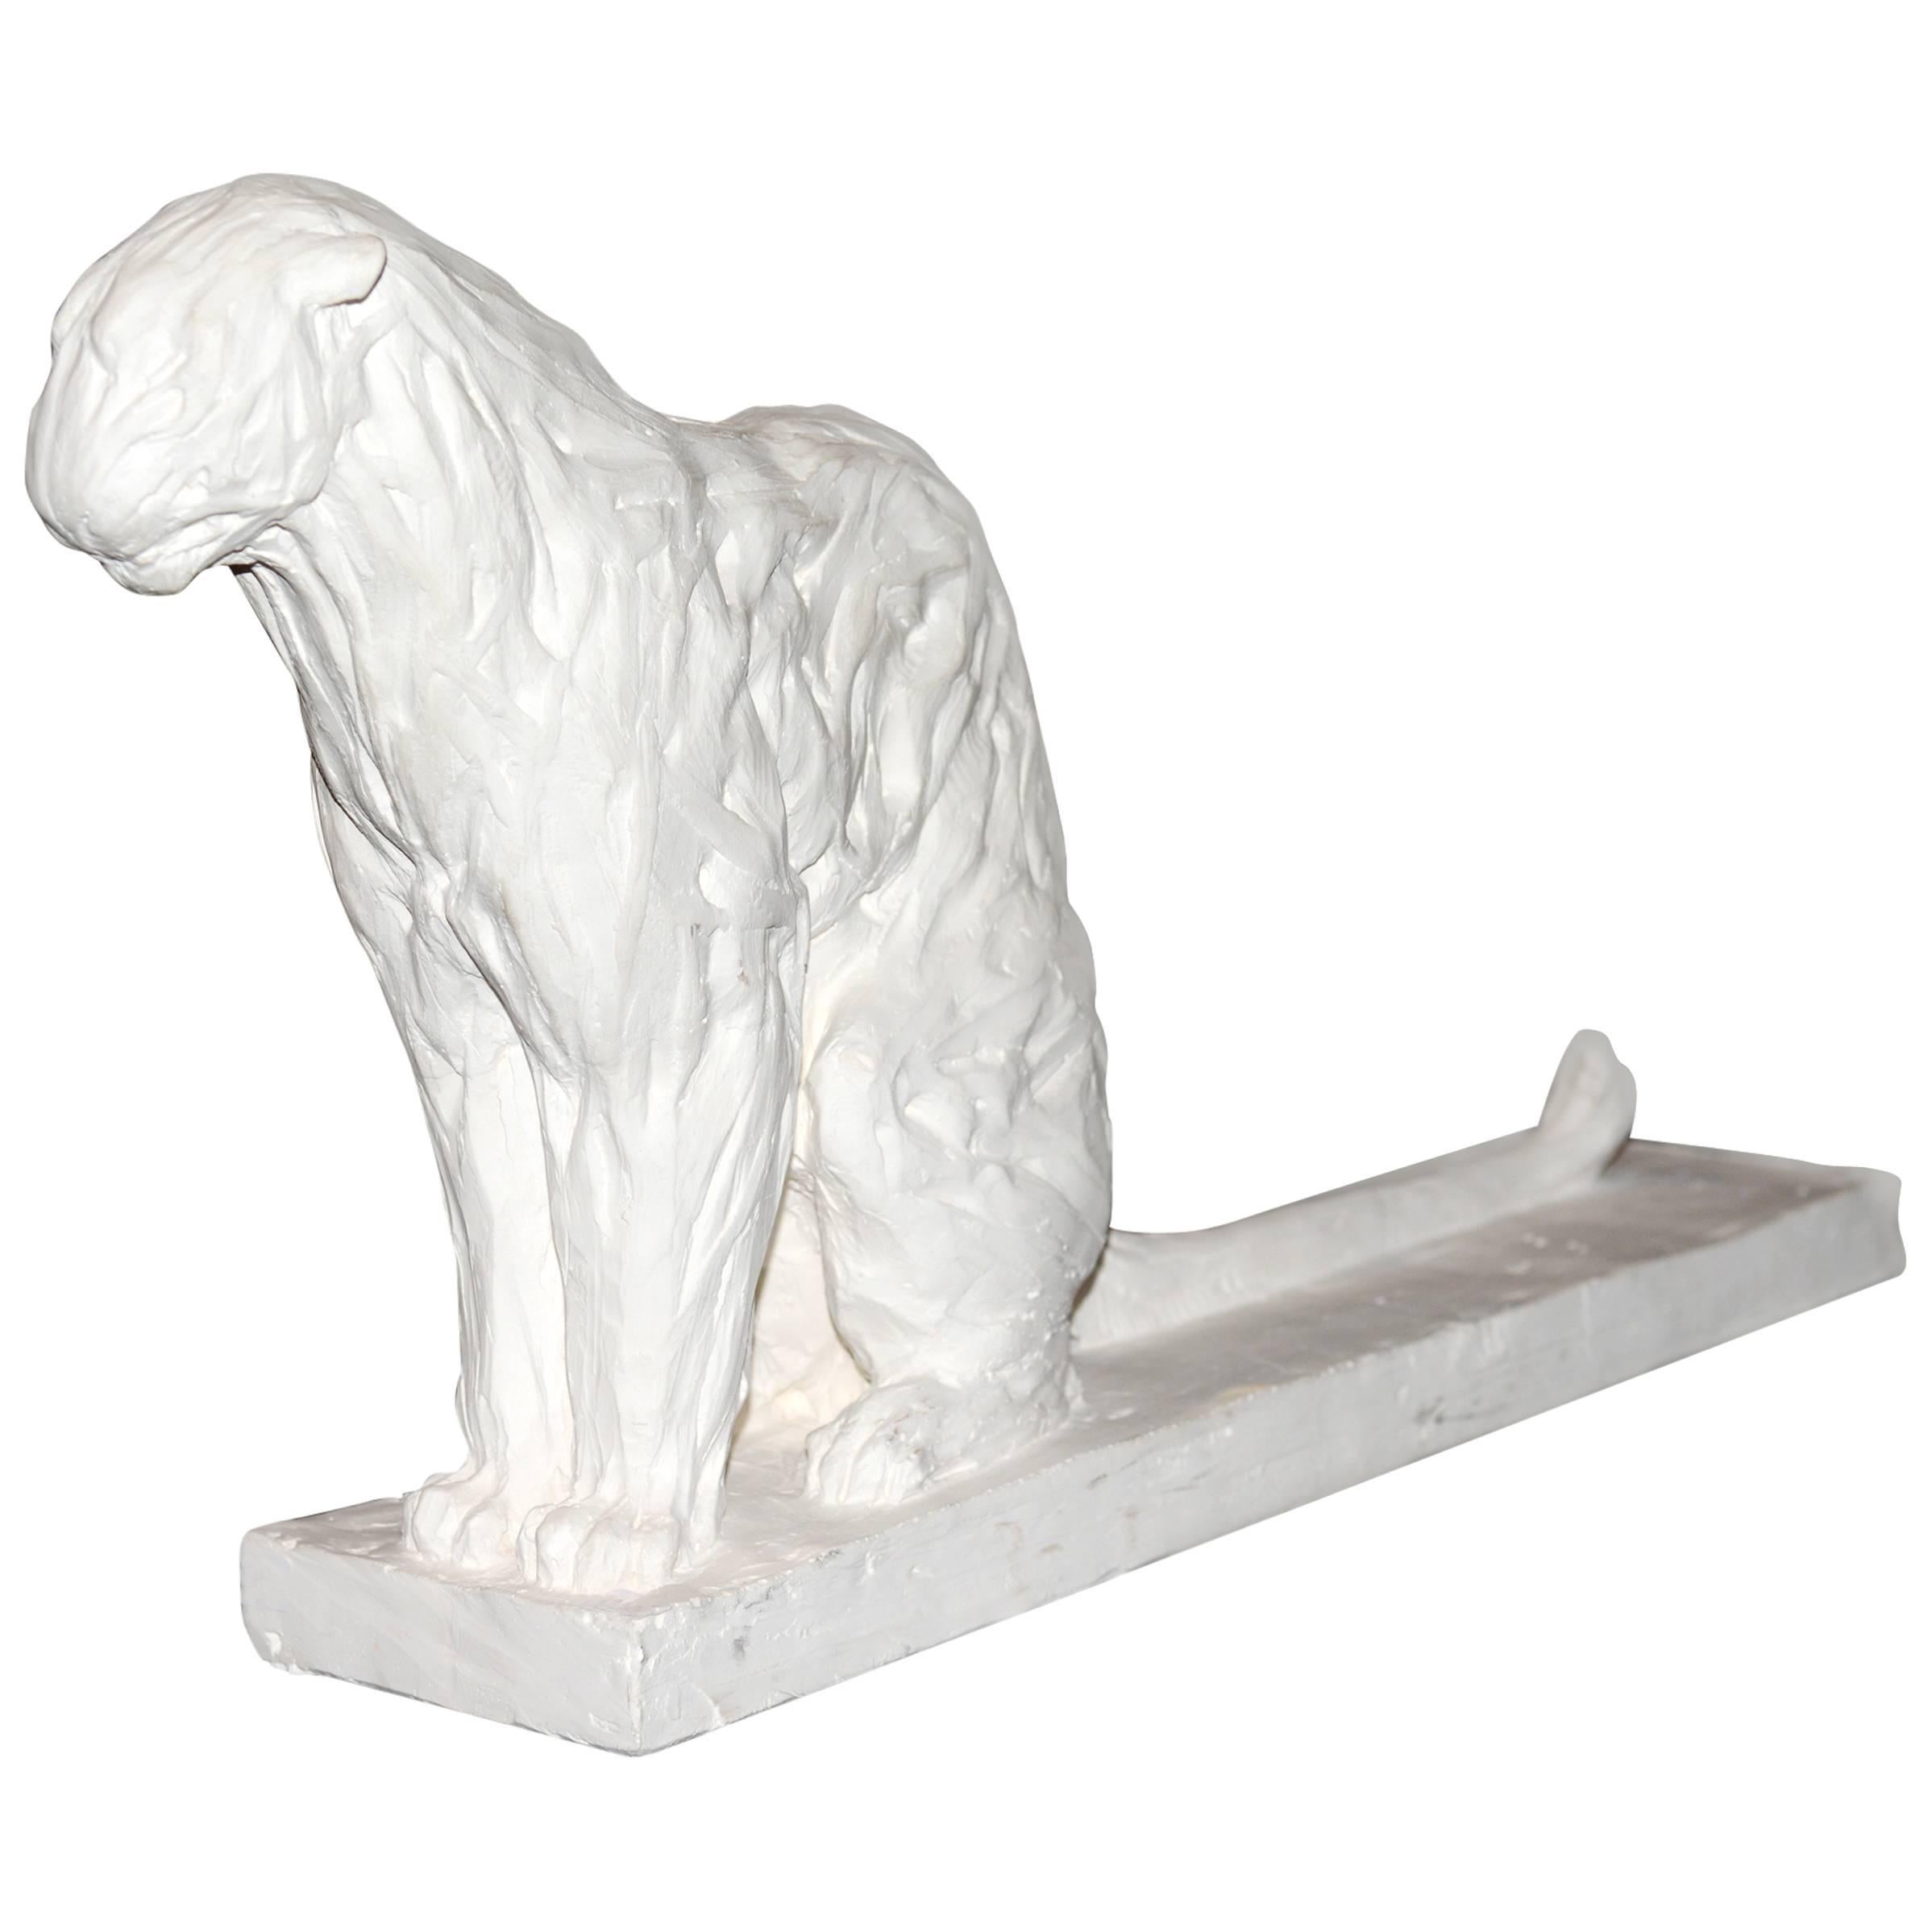 Sculpture Panther in Plaster Limited Edition 45/100 by J.B Vandame, 2015